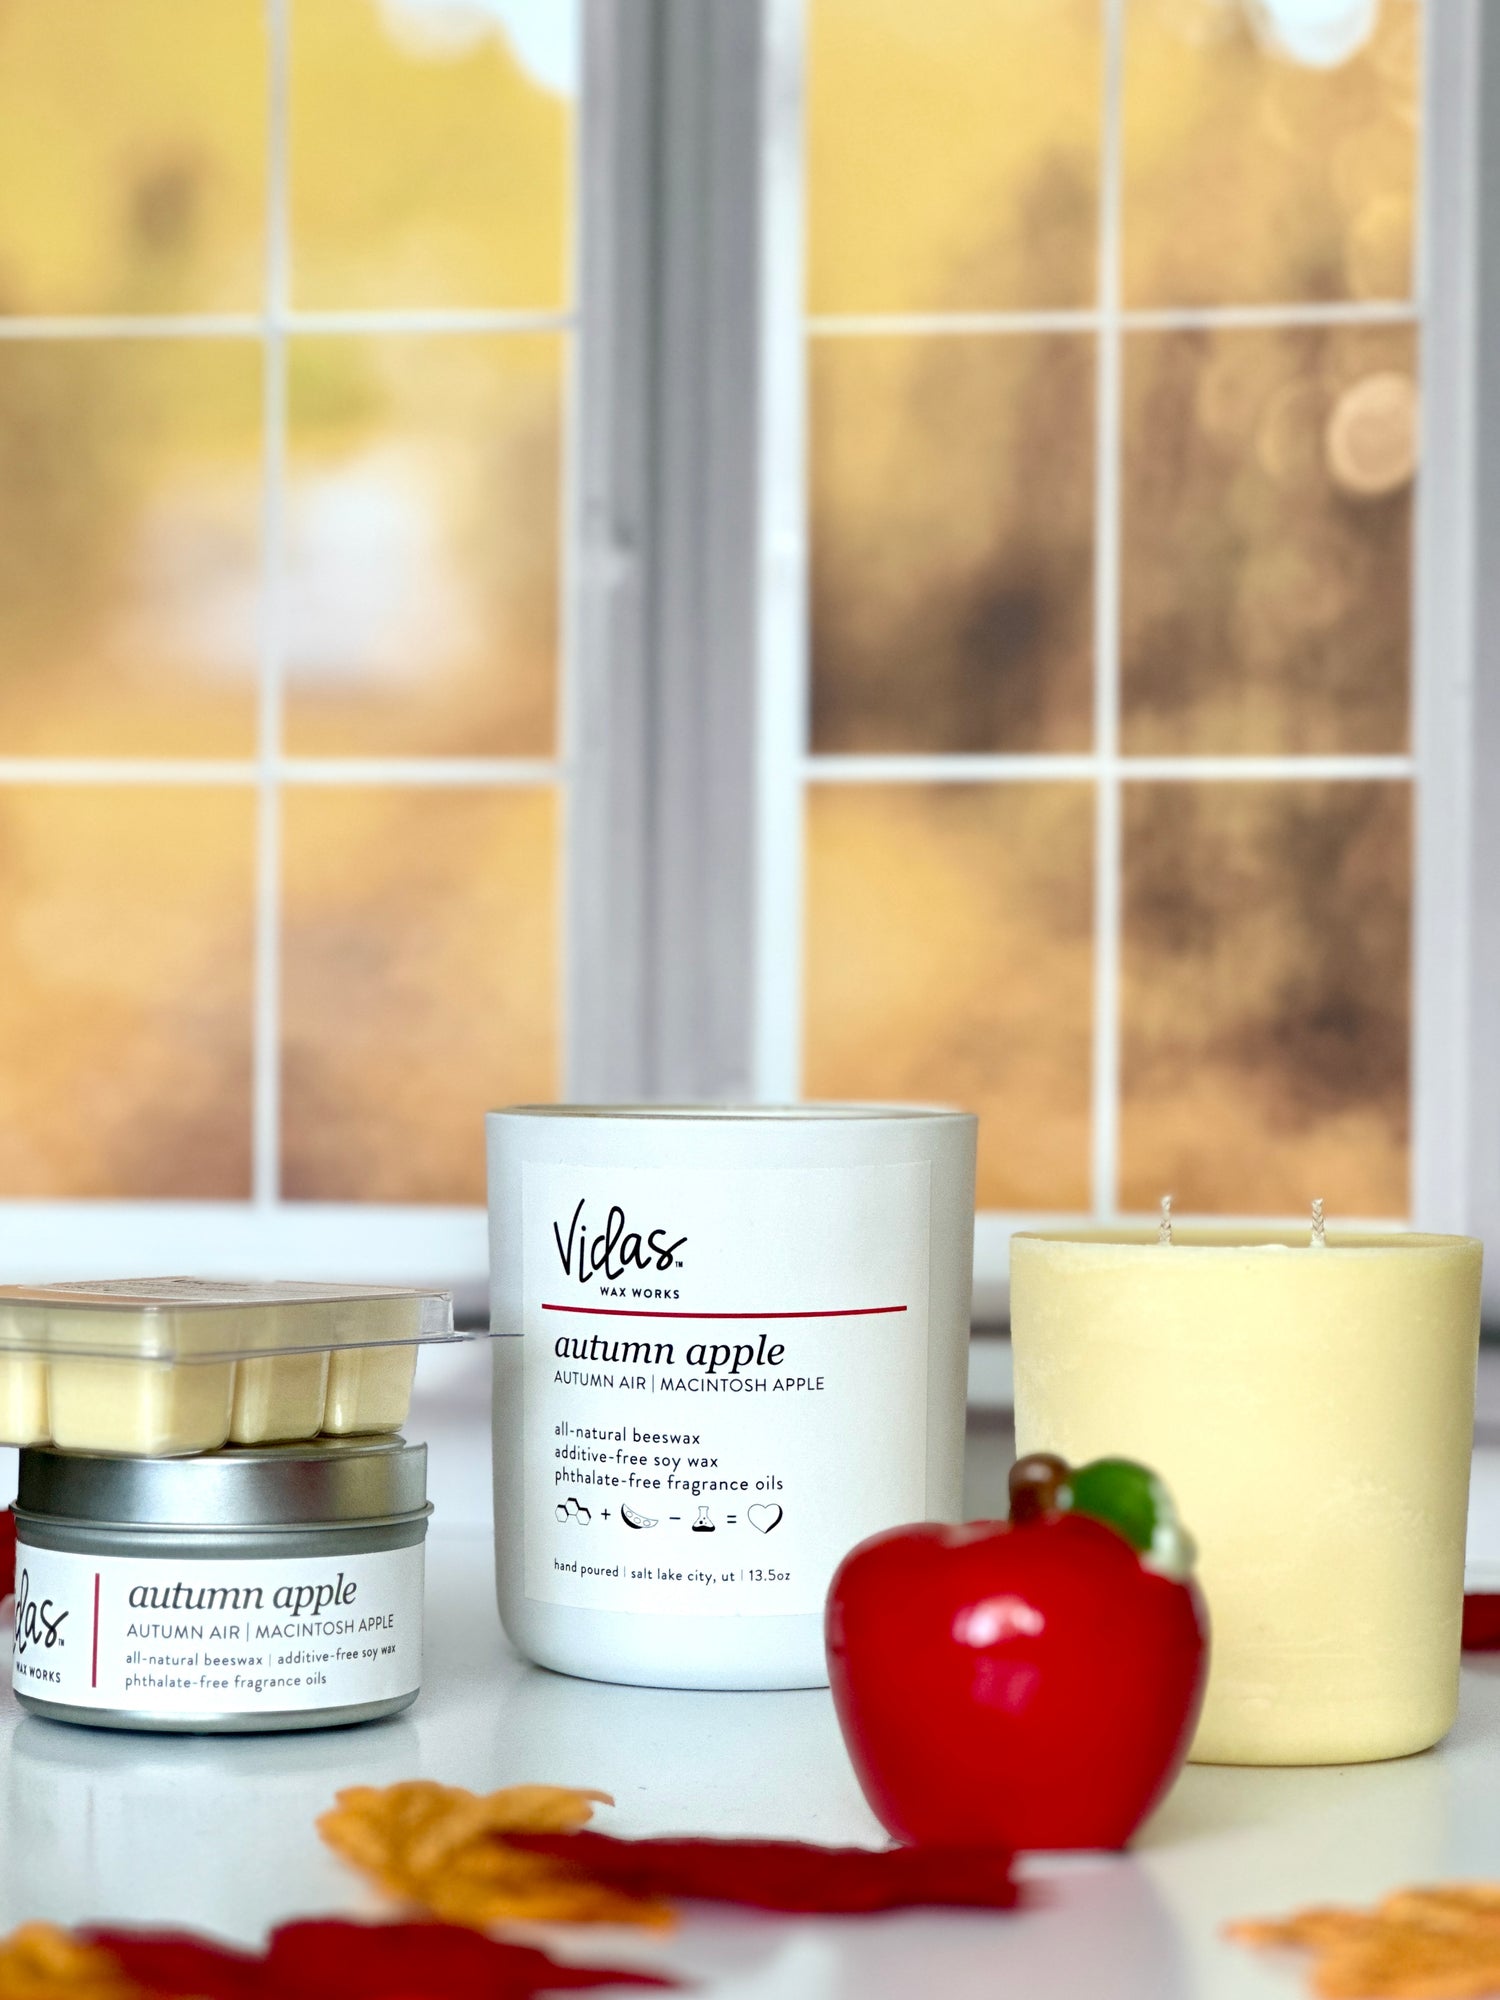 Embrace the autumn ambience with our “Autumn Apple” scent, a delightful blend of autumn air and macintosh apple. Against a backdrop of blurred fall-colored leaves outside a window, the collection features a range of offerings: a 13.5oz candle in a chic matte white jar, a 13.5oz candle refill, a compact 3.5oz candle tin, and dainty 2.5oz wax melts. A symphony of scents to elevate your seasonal moments.